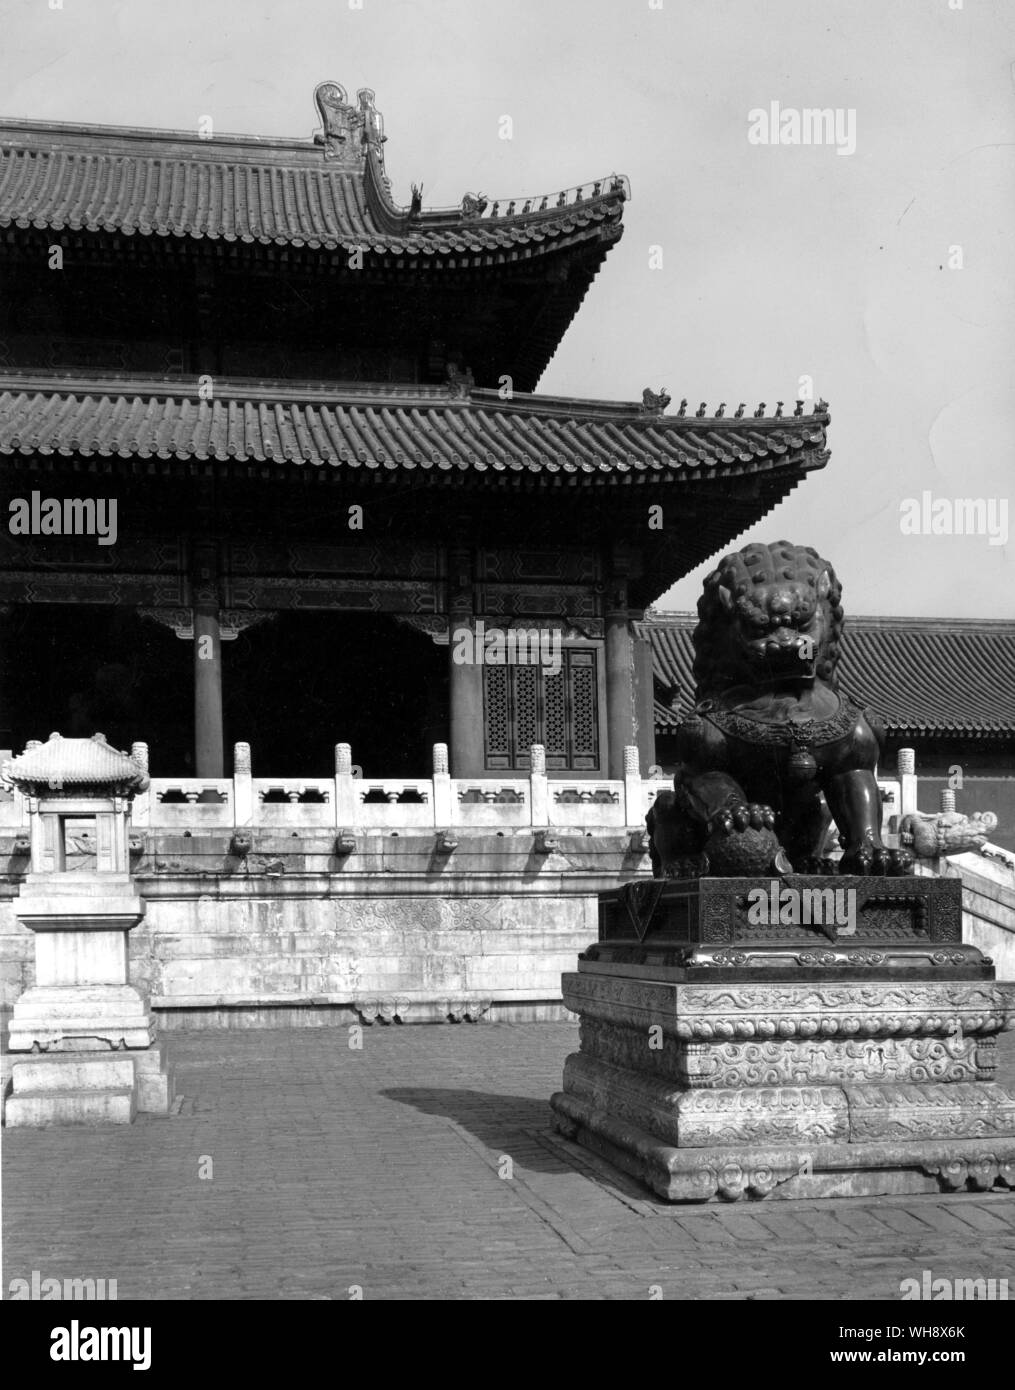 Imperial Palace Black And White Stock Photos Images Alamy